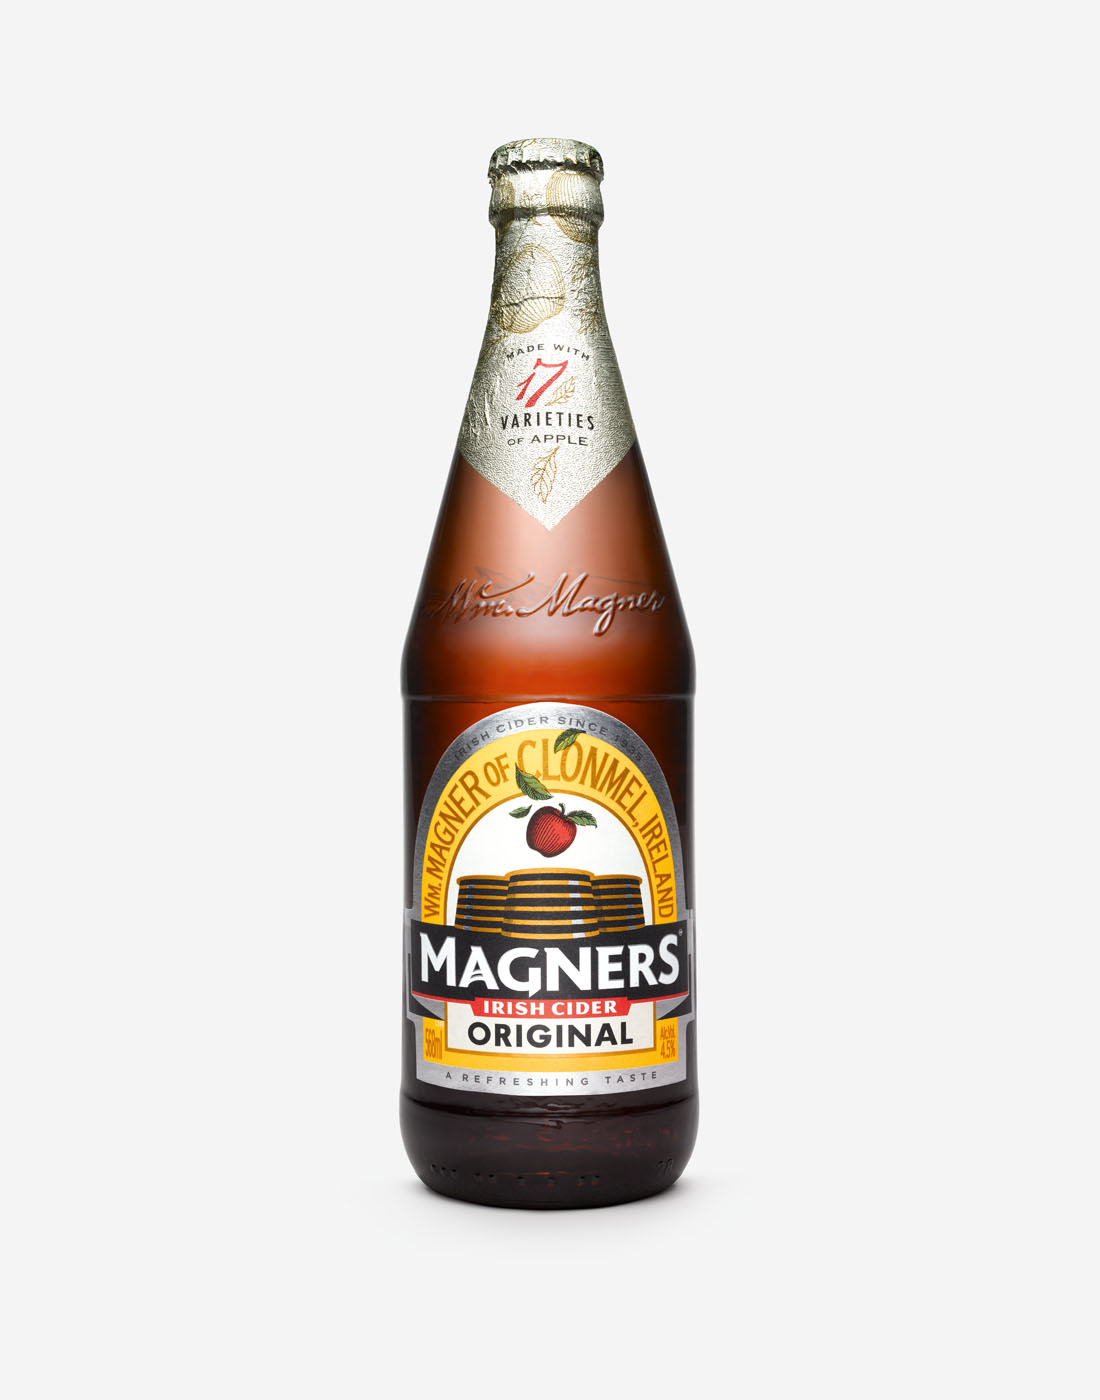 Magners cider by  Alexander Kent London based still life and product photographer.